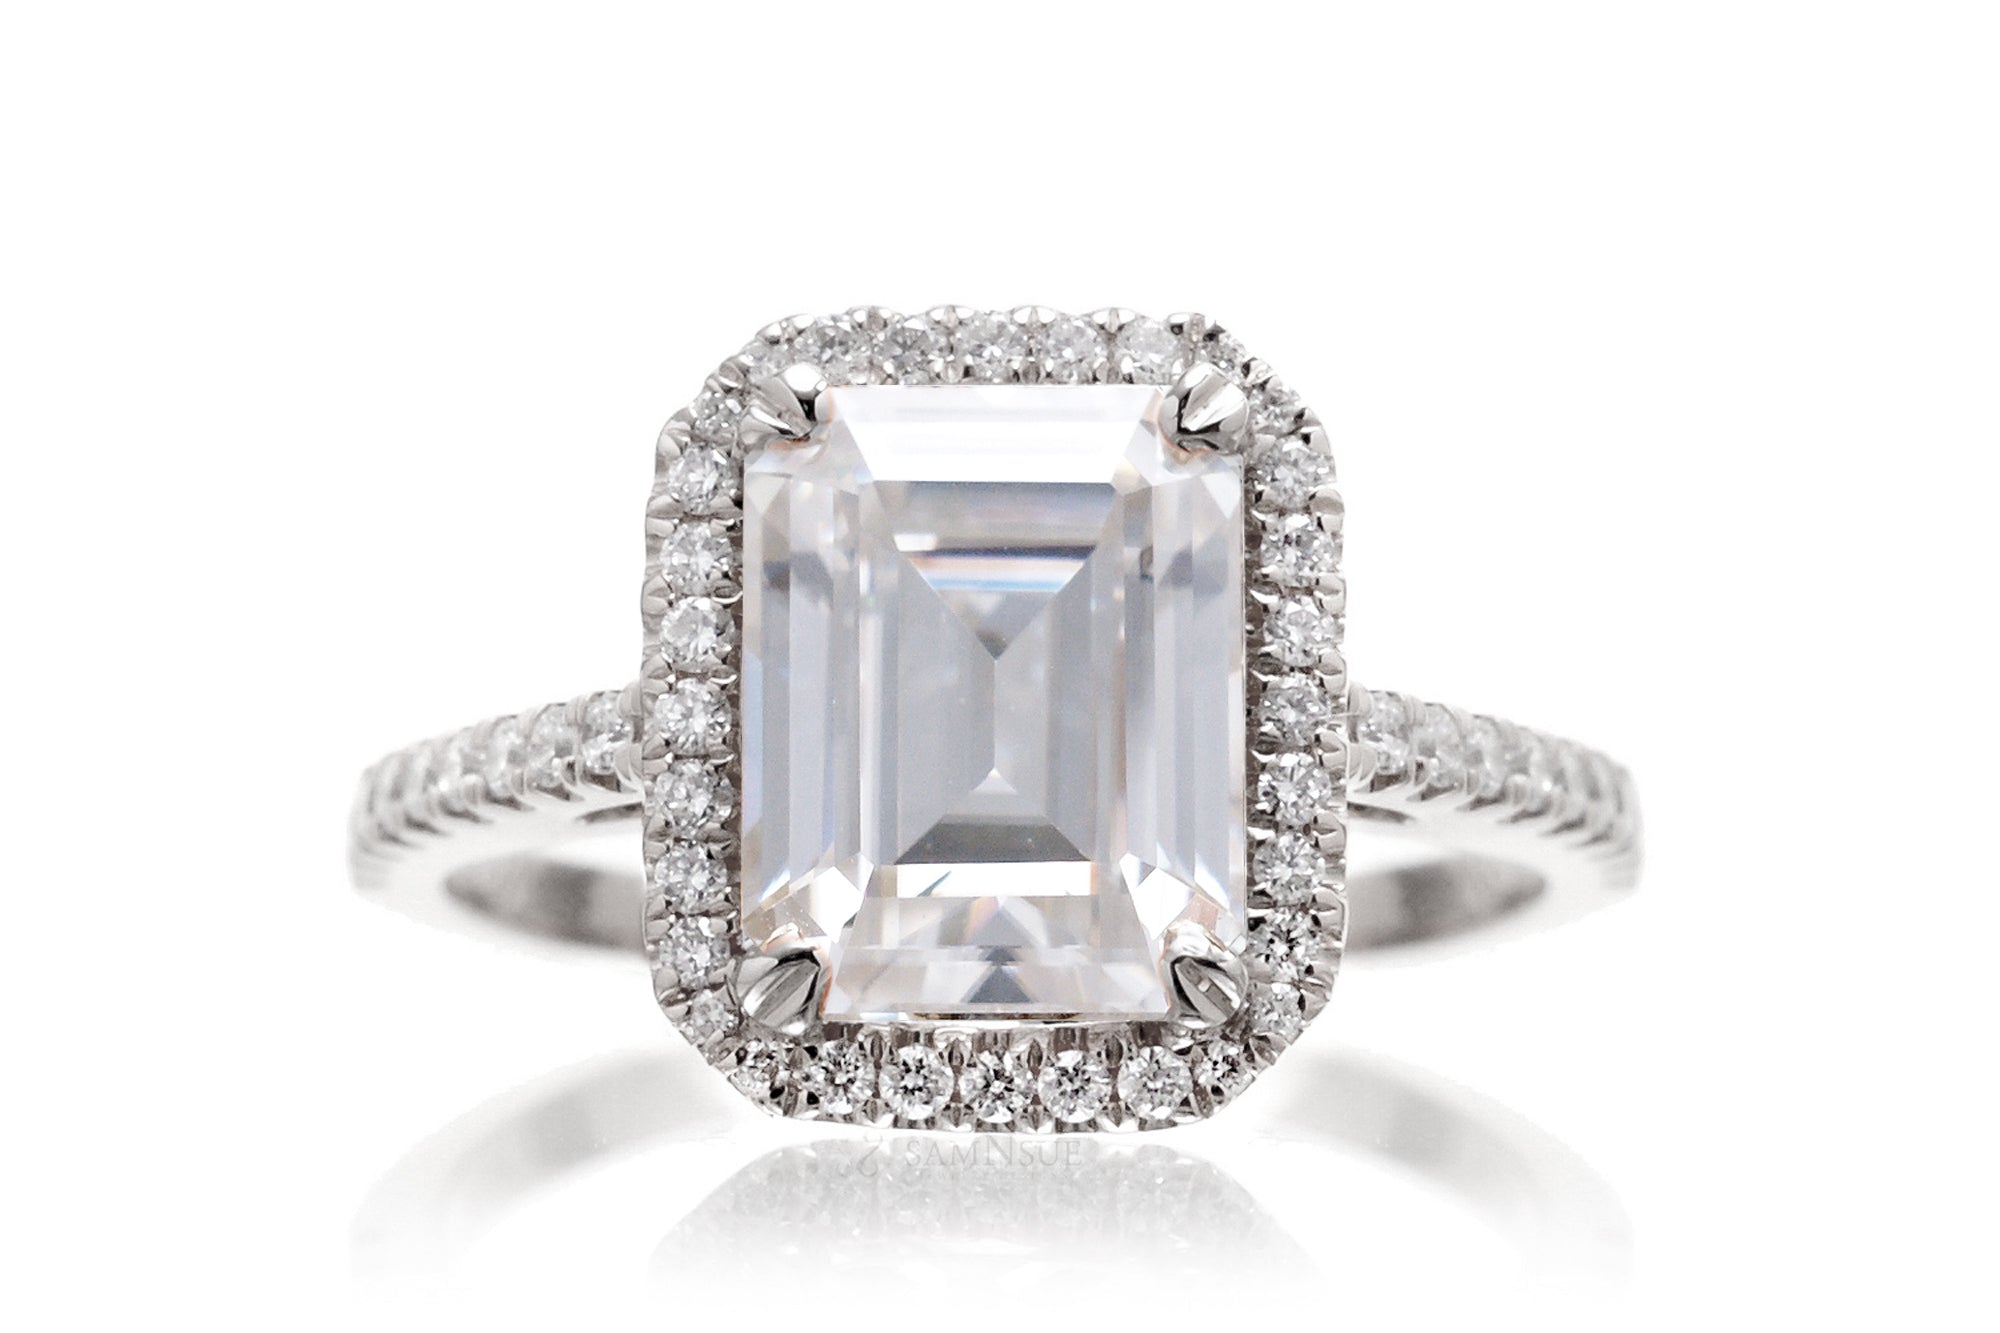 Emerald Cut Moissanite With Diamond Halo Ring | The Signature In White Gold